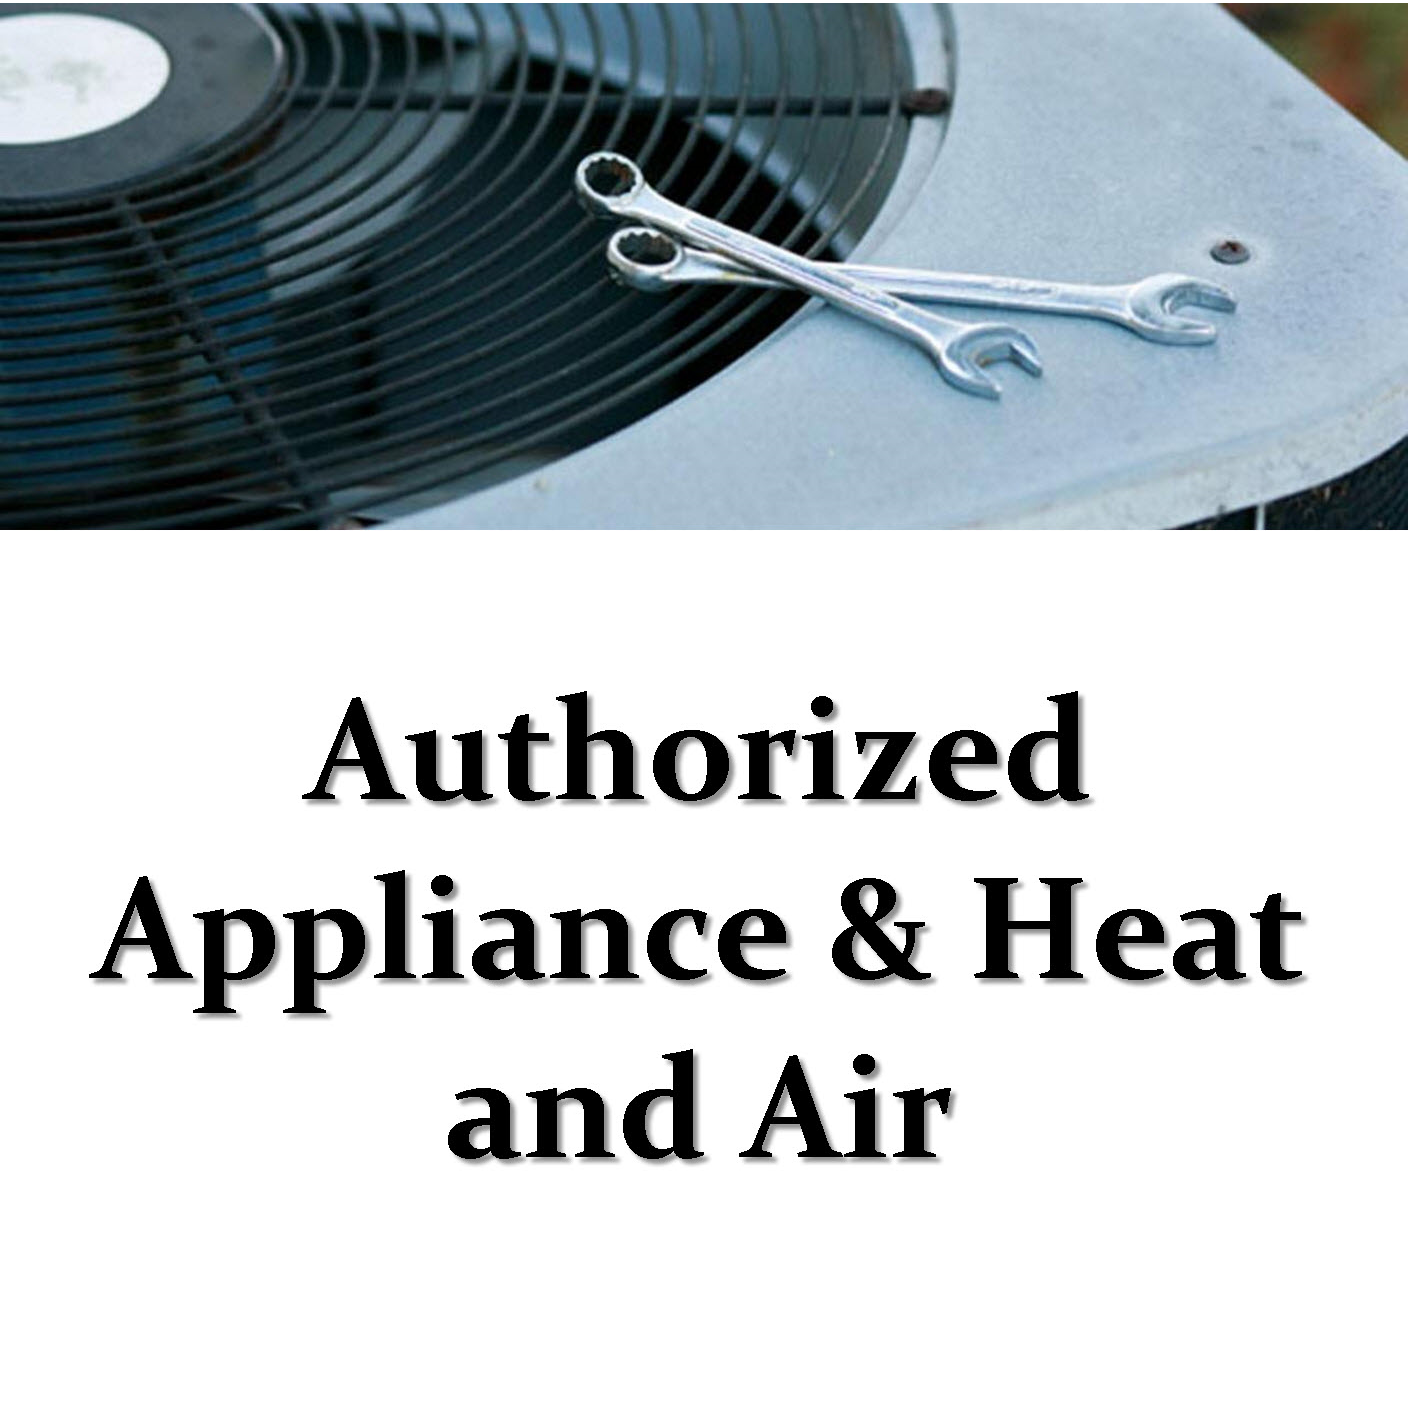 Authorized Appliance & Heat and Air